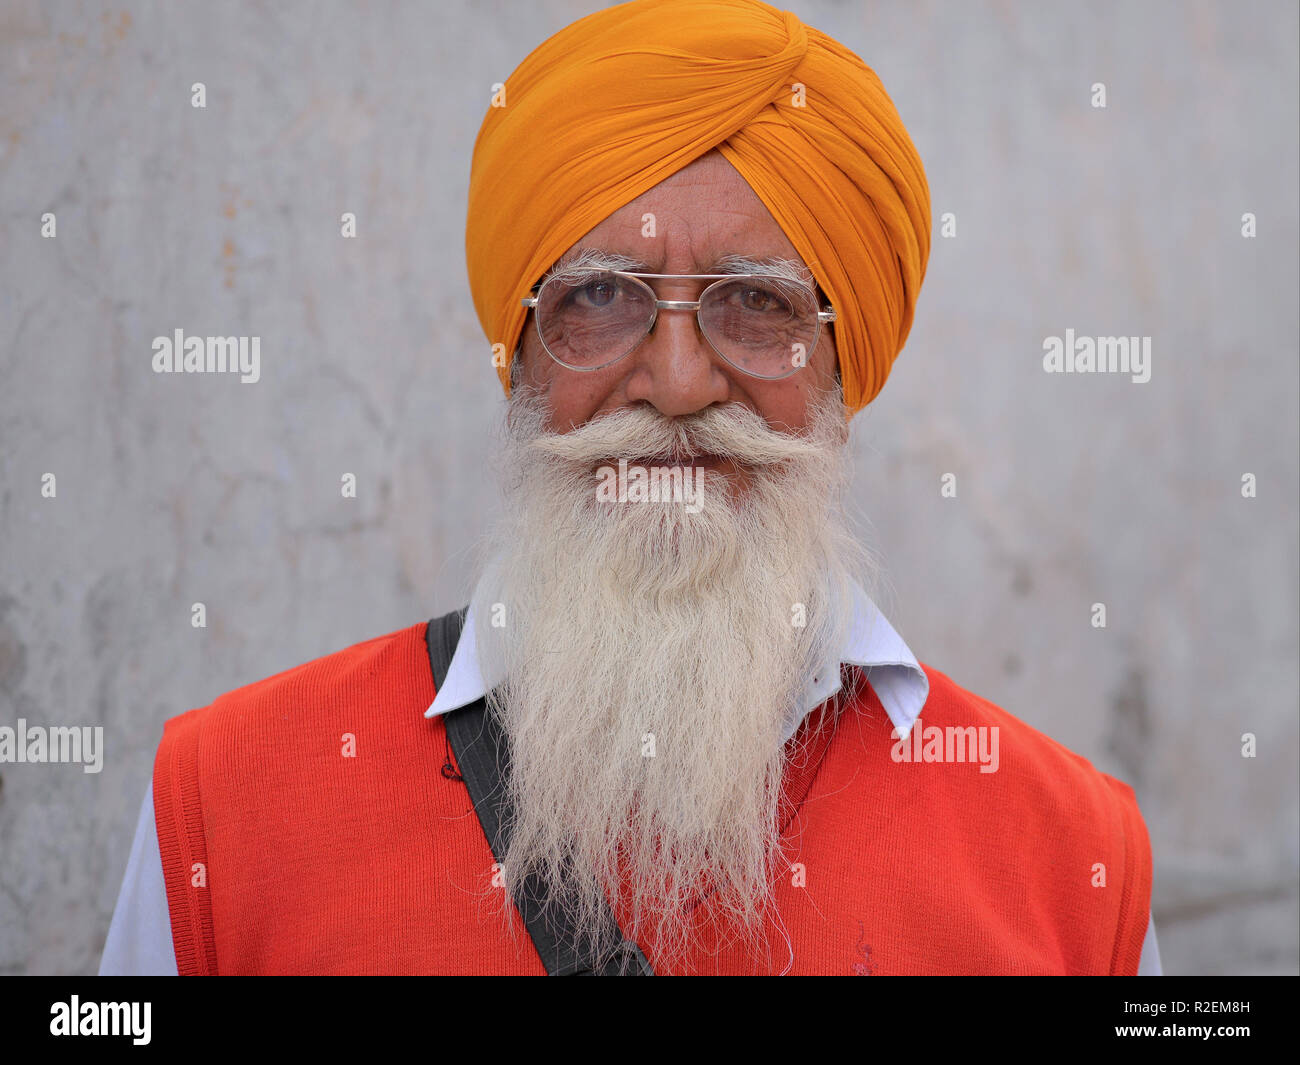 Elderly Indian Sikh man with an orange turban (dastar) and aviator-style eyeglasses poses for the camera. Stock Photo